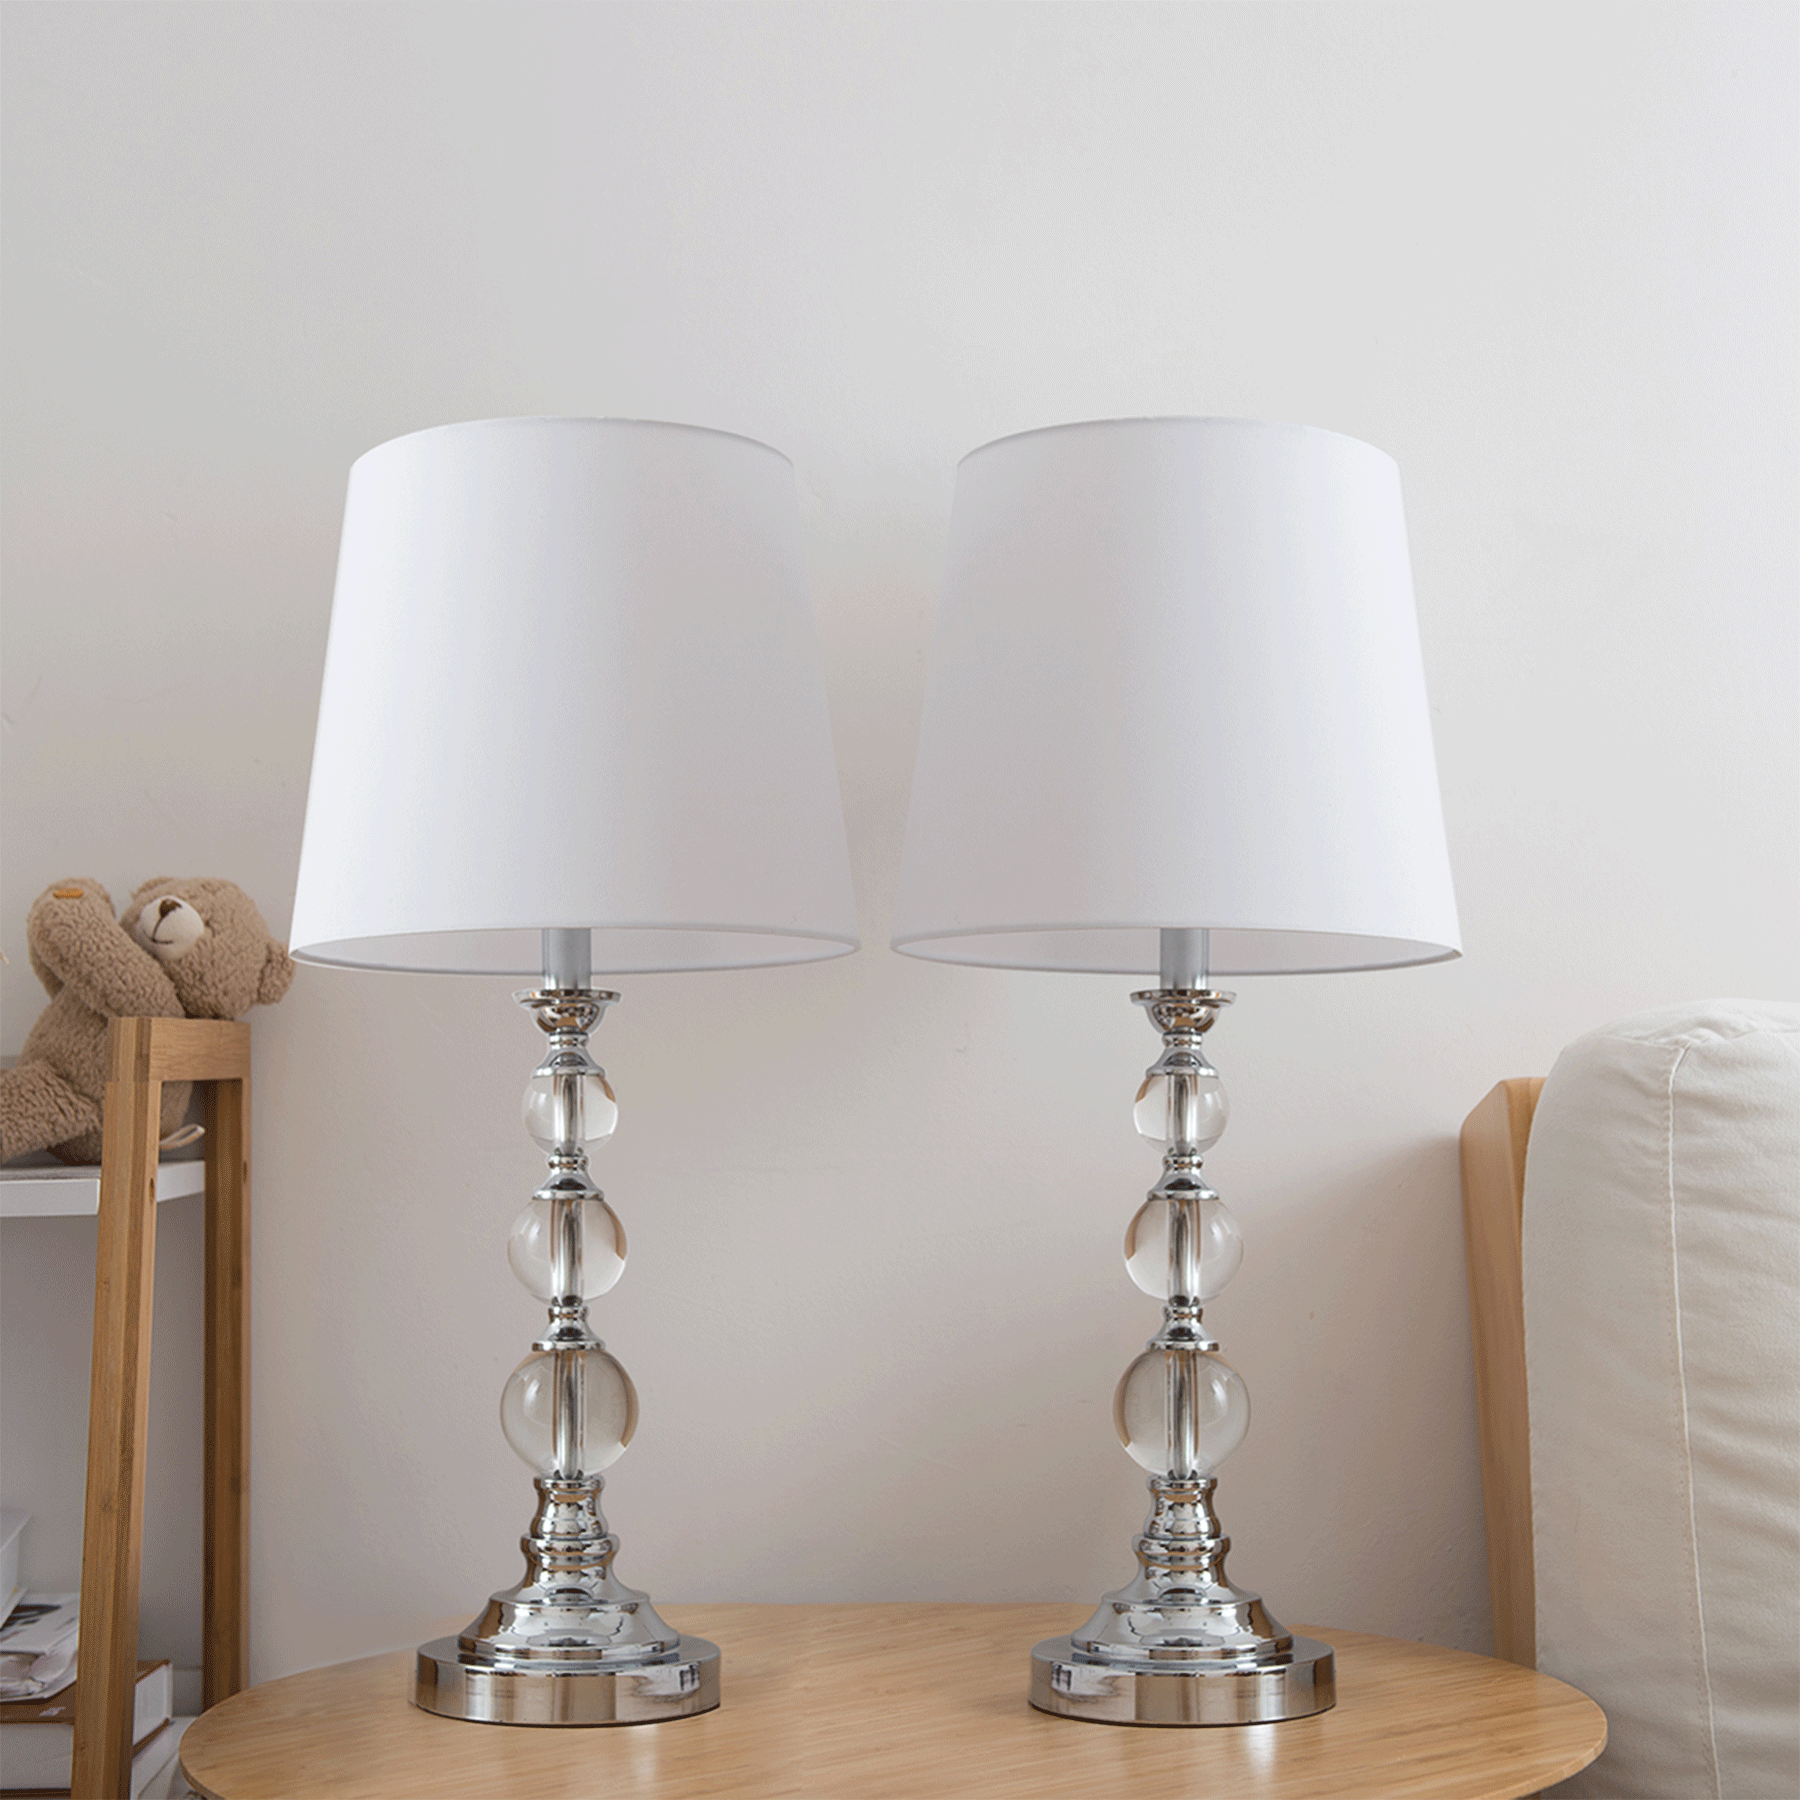 Set Of 2 Portable Crystal Ball Stacked, Large Crystal Ball Table Lamp